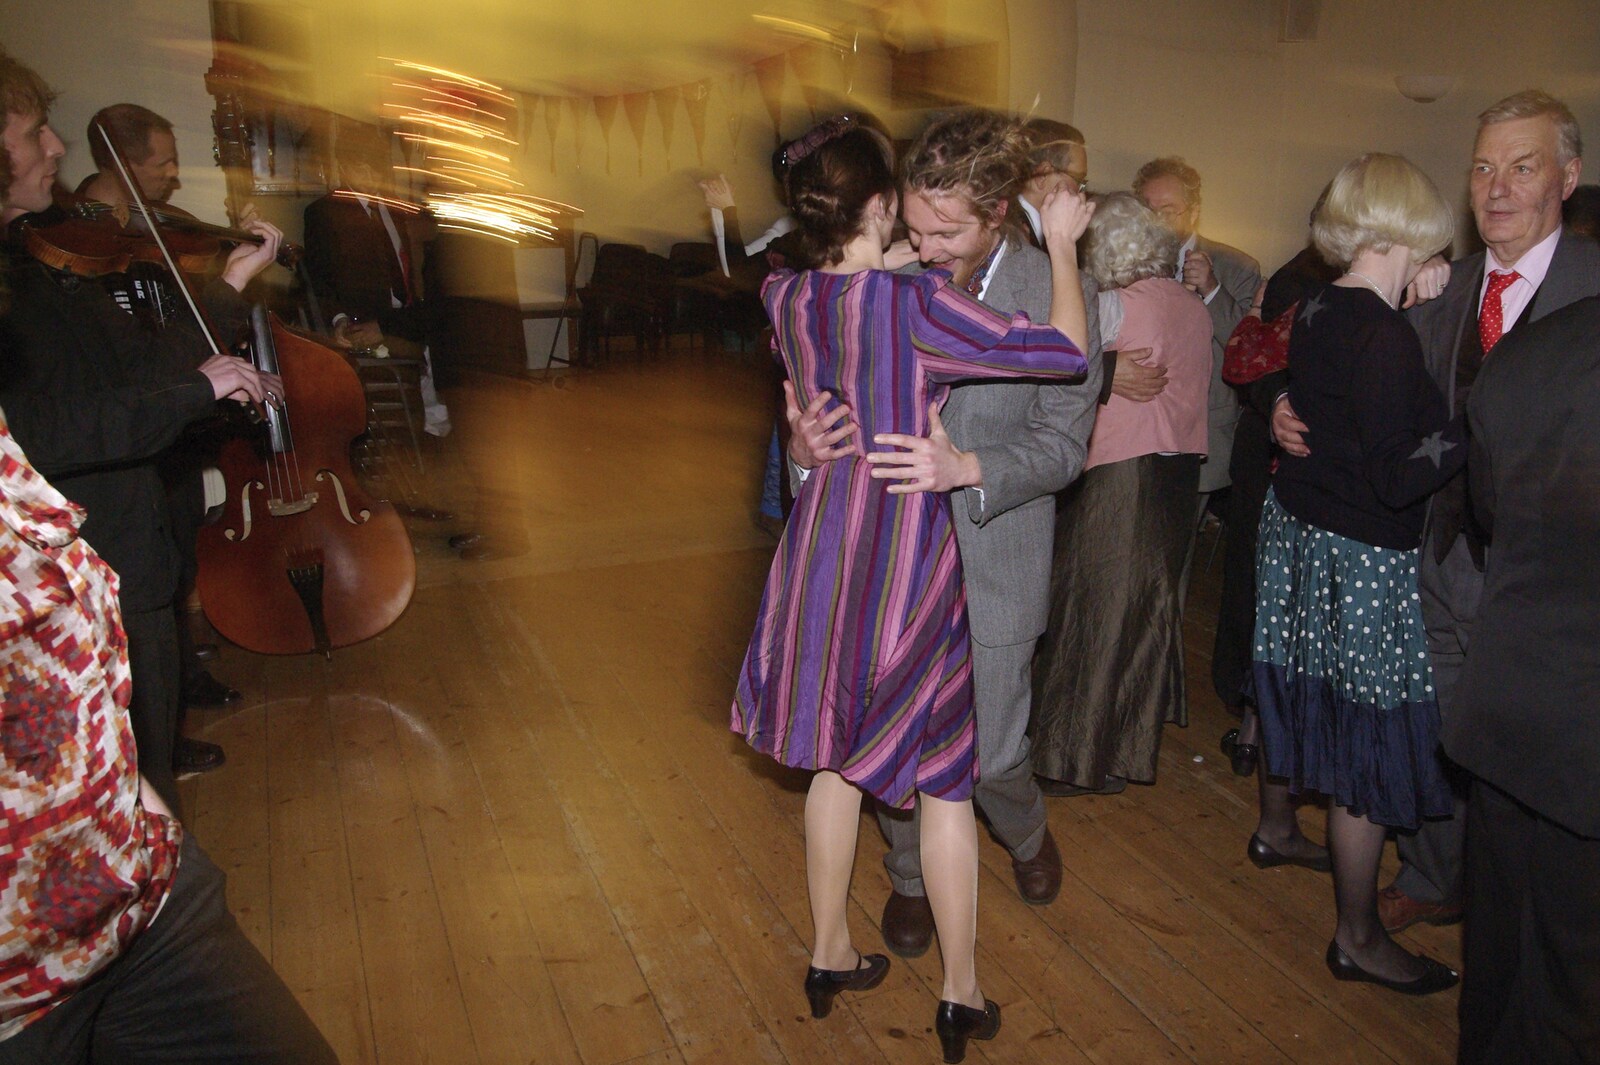 More dancing to the band from An Oxford Wedding, Iffley, Oxfordshire - 20th December 2008